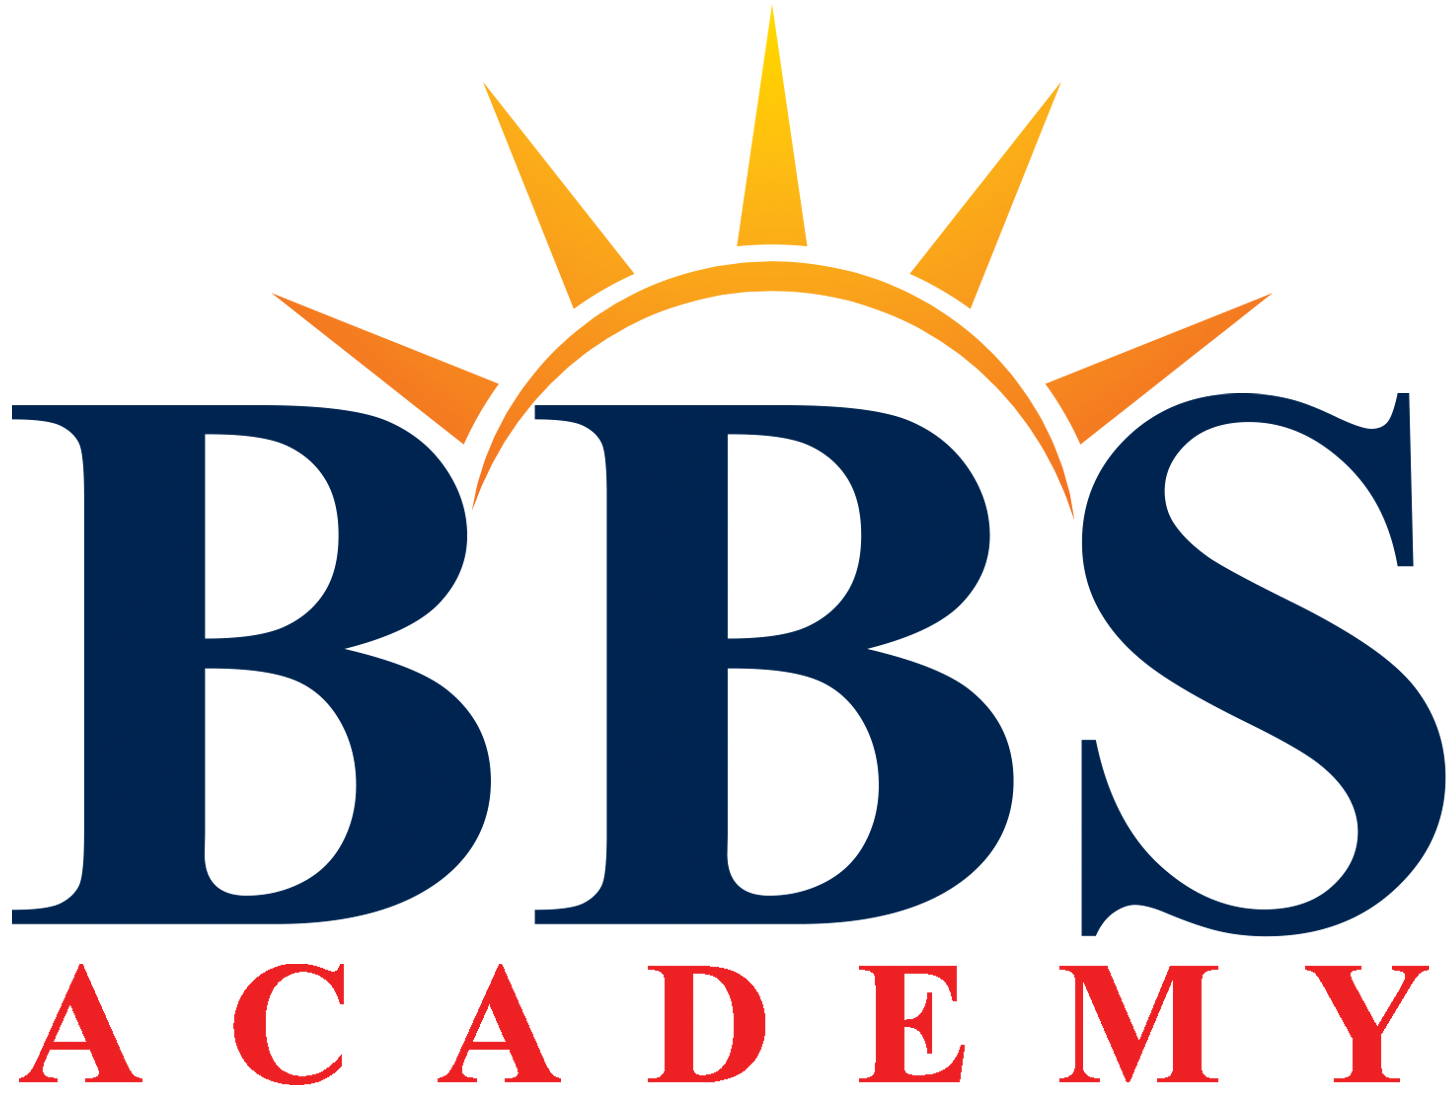 BBS ACADEMY|Colleges|Education